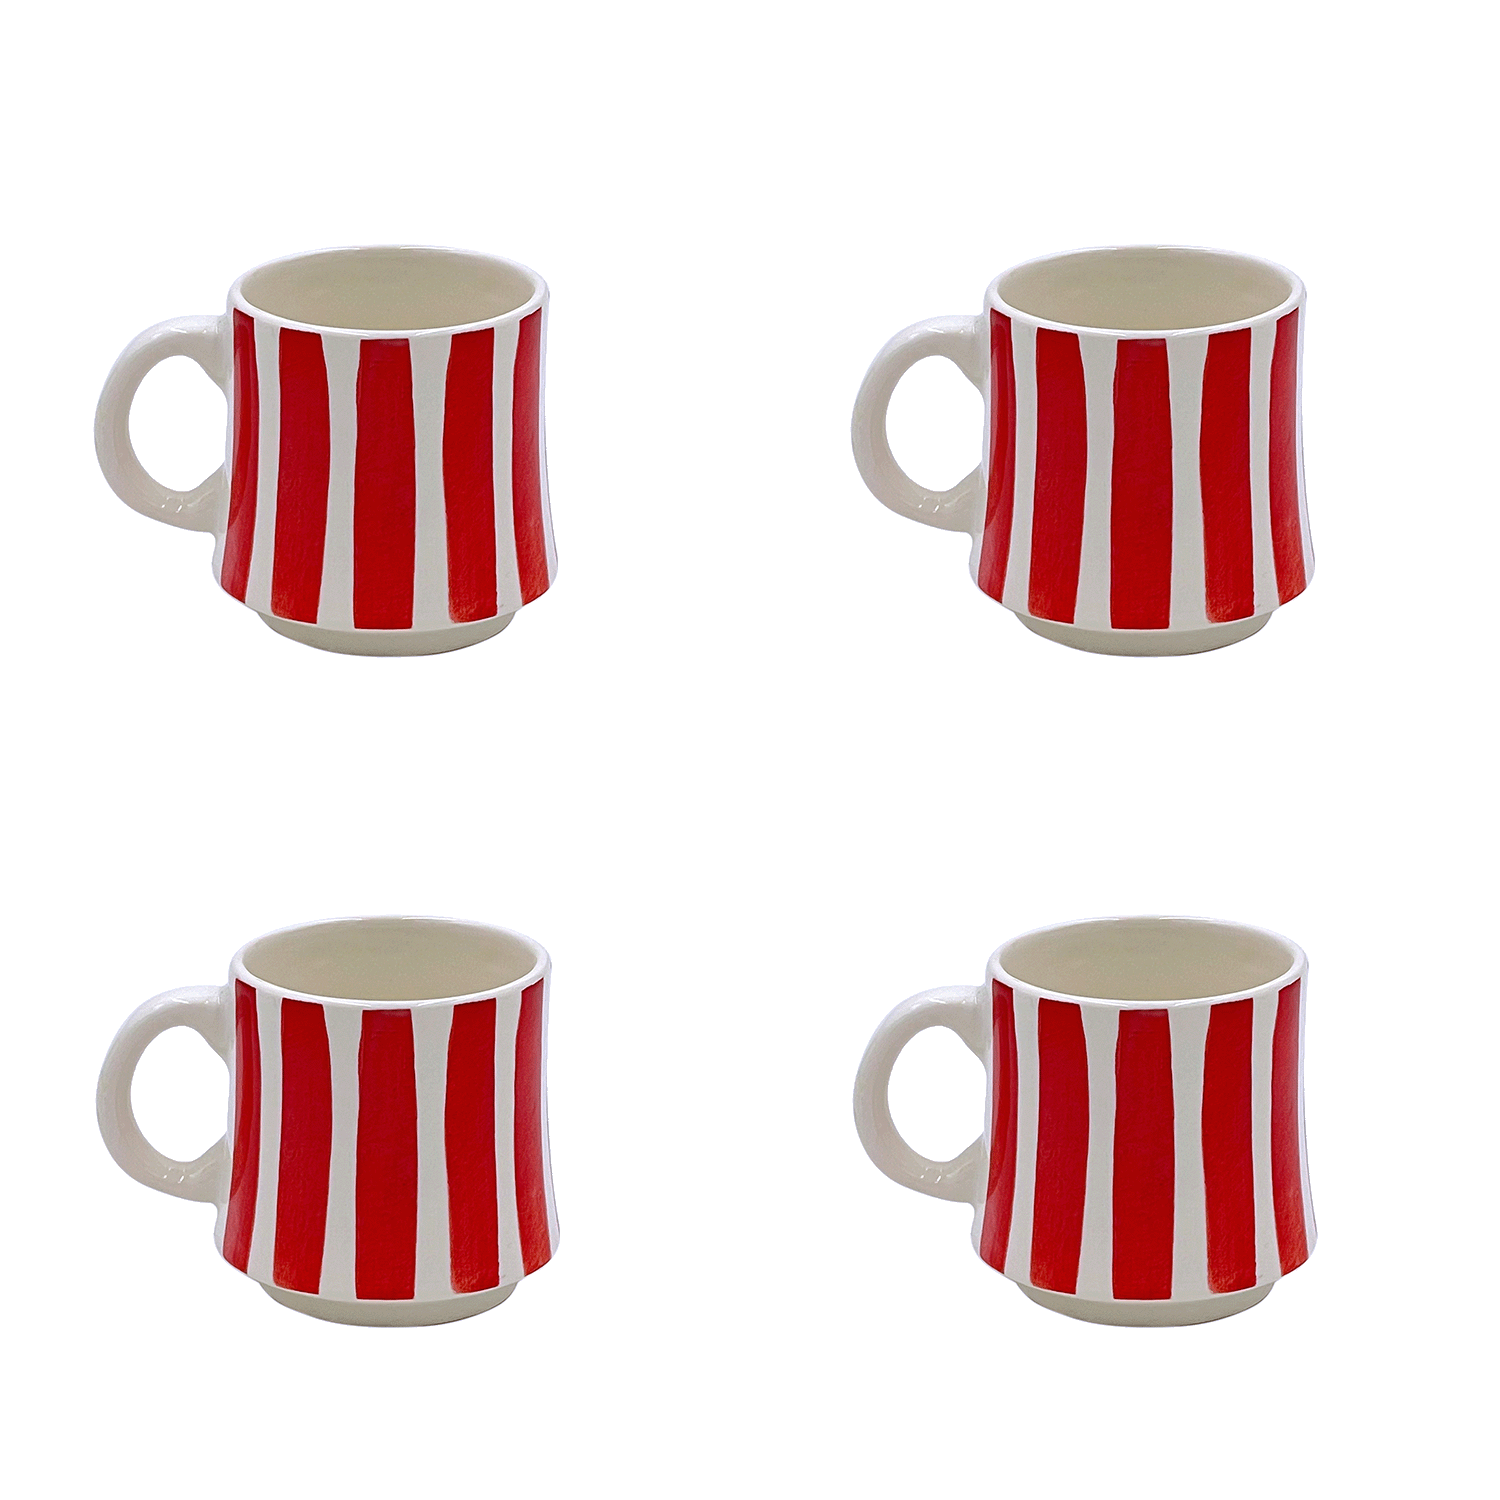 Small Red Stripes Mugs (Set of 4)